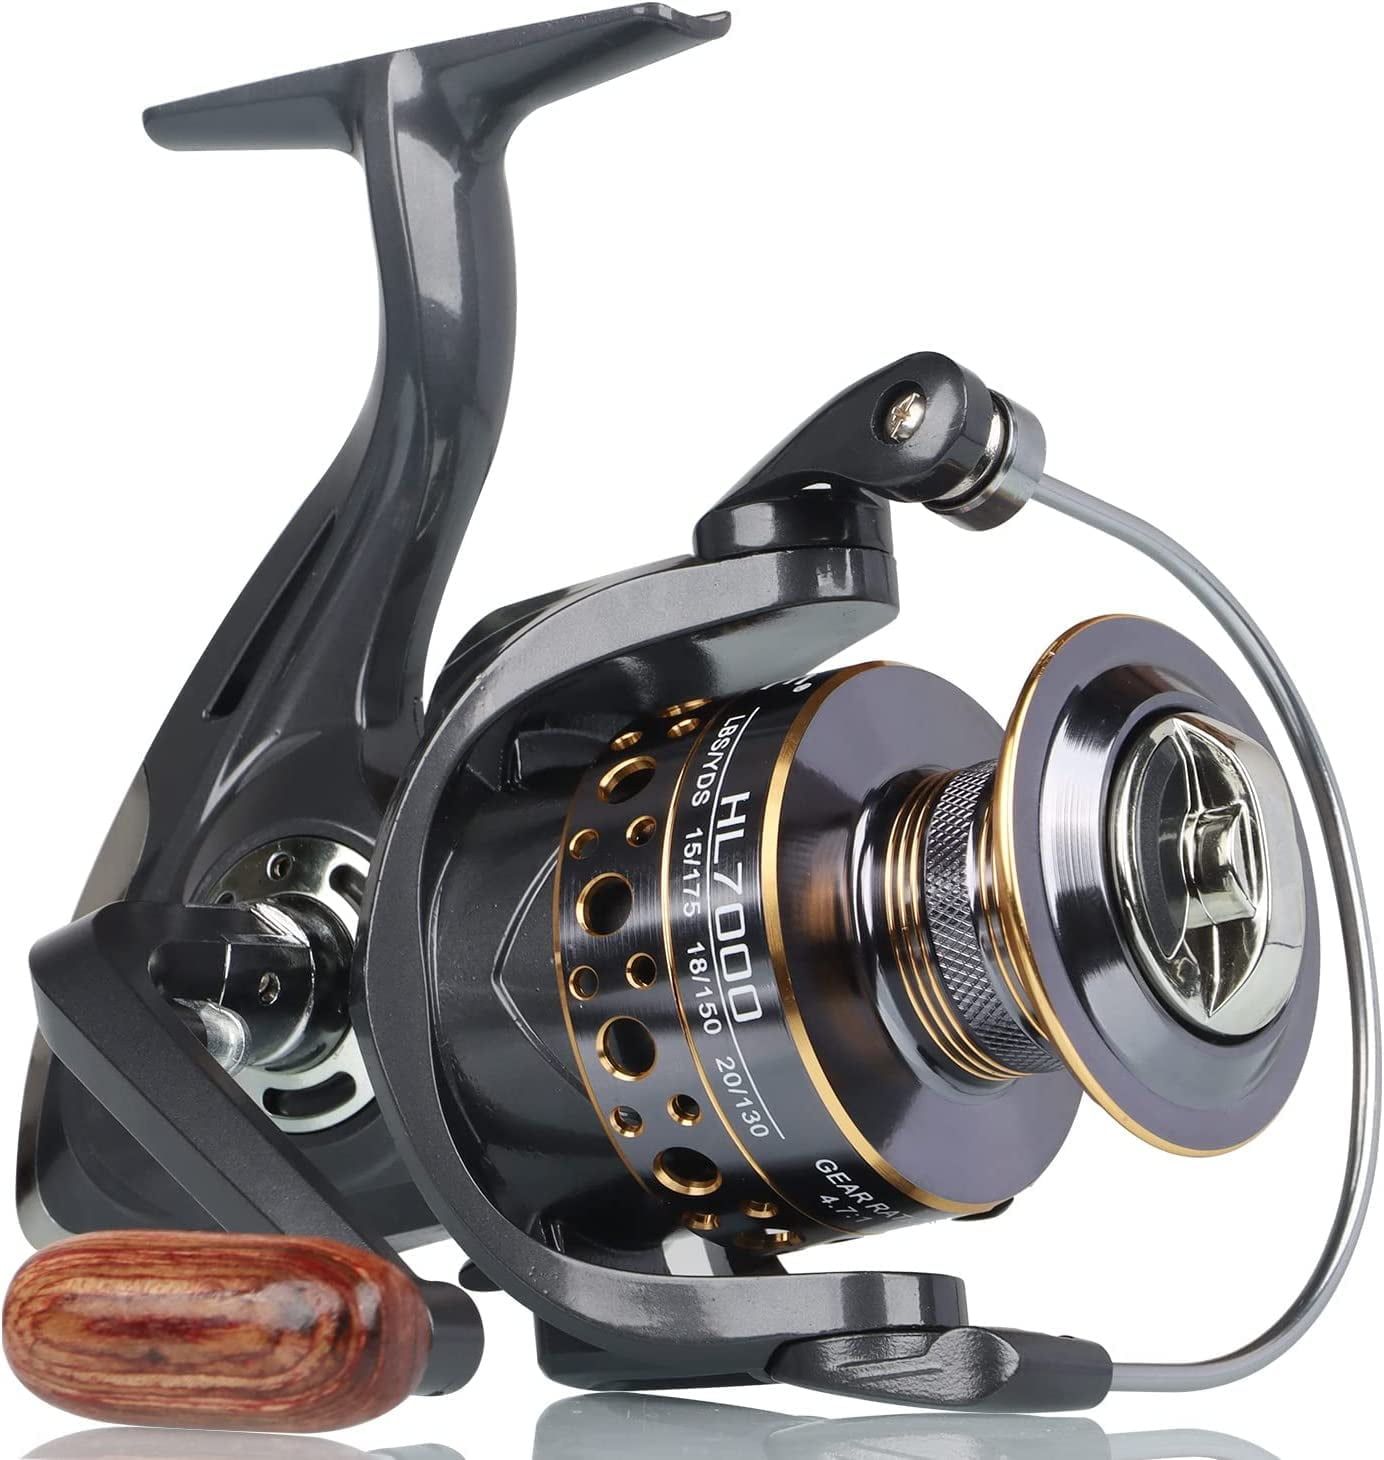 Spinning Fishing Reel 1000-7000 Series Ultralight Max Drag 8kg 5.2:1  Surfcasting Spinning Reel Saltwater Fishing Accessories - AliExpress